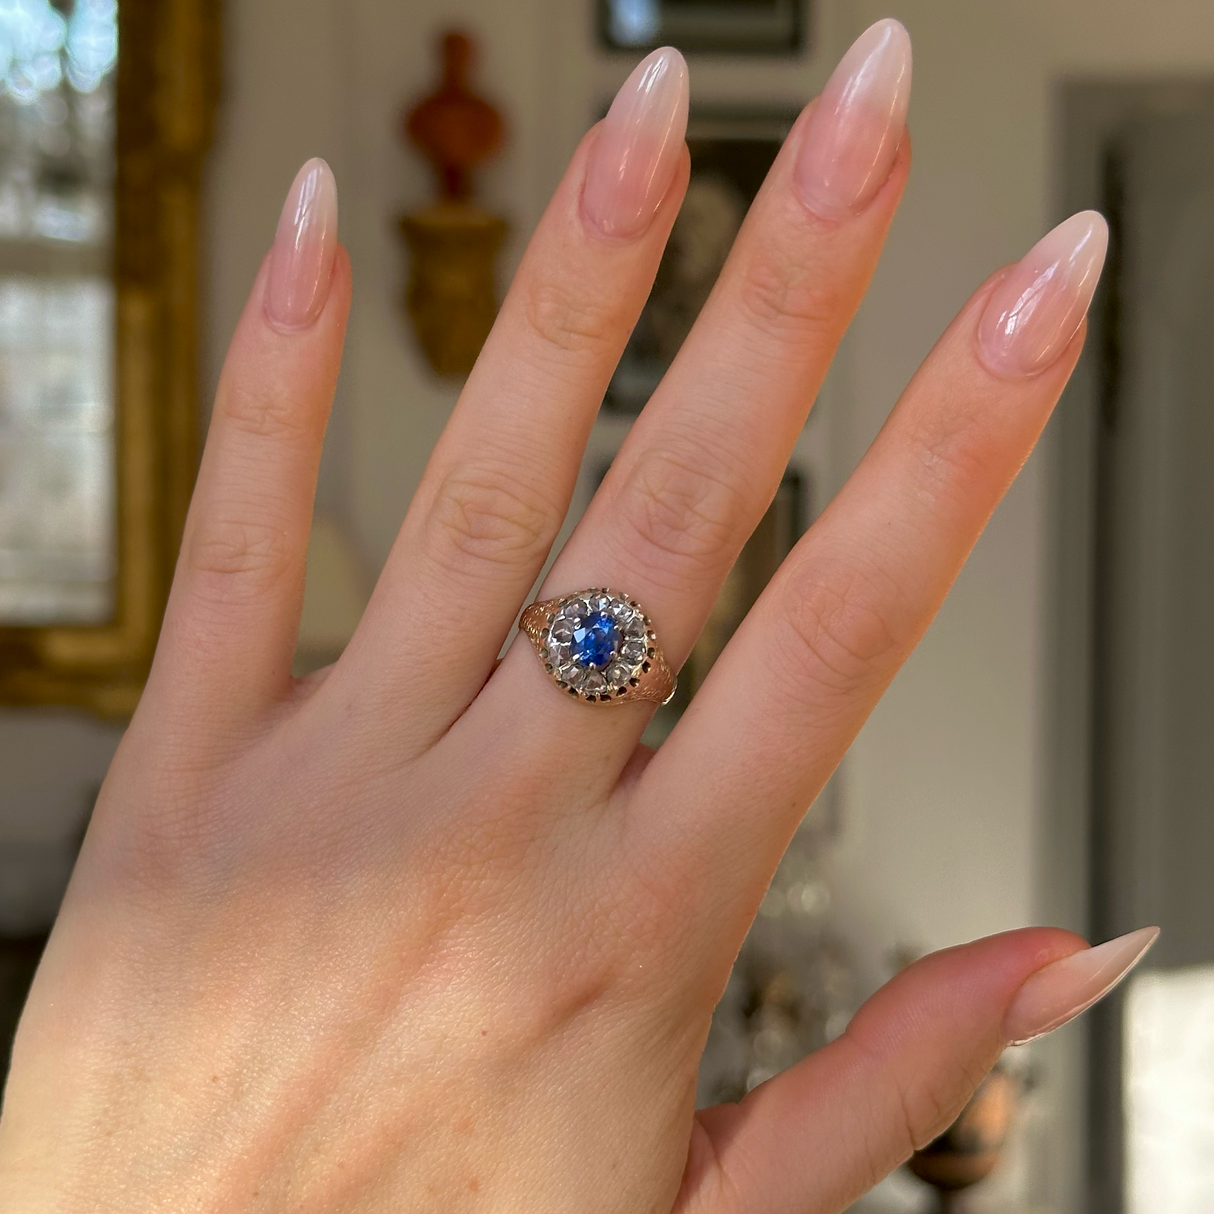  Antique, Victorian Sapphire and Diamond Daisy Cluster Ring, 18ct Yellow Gold worn on hand. 